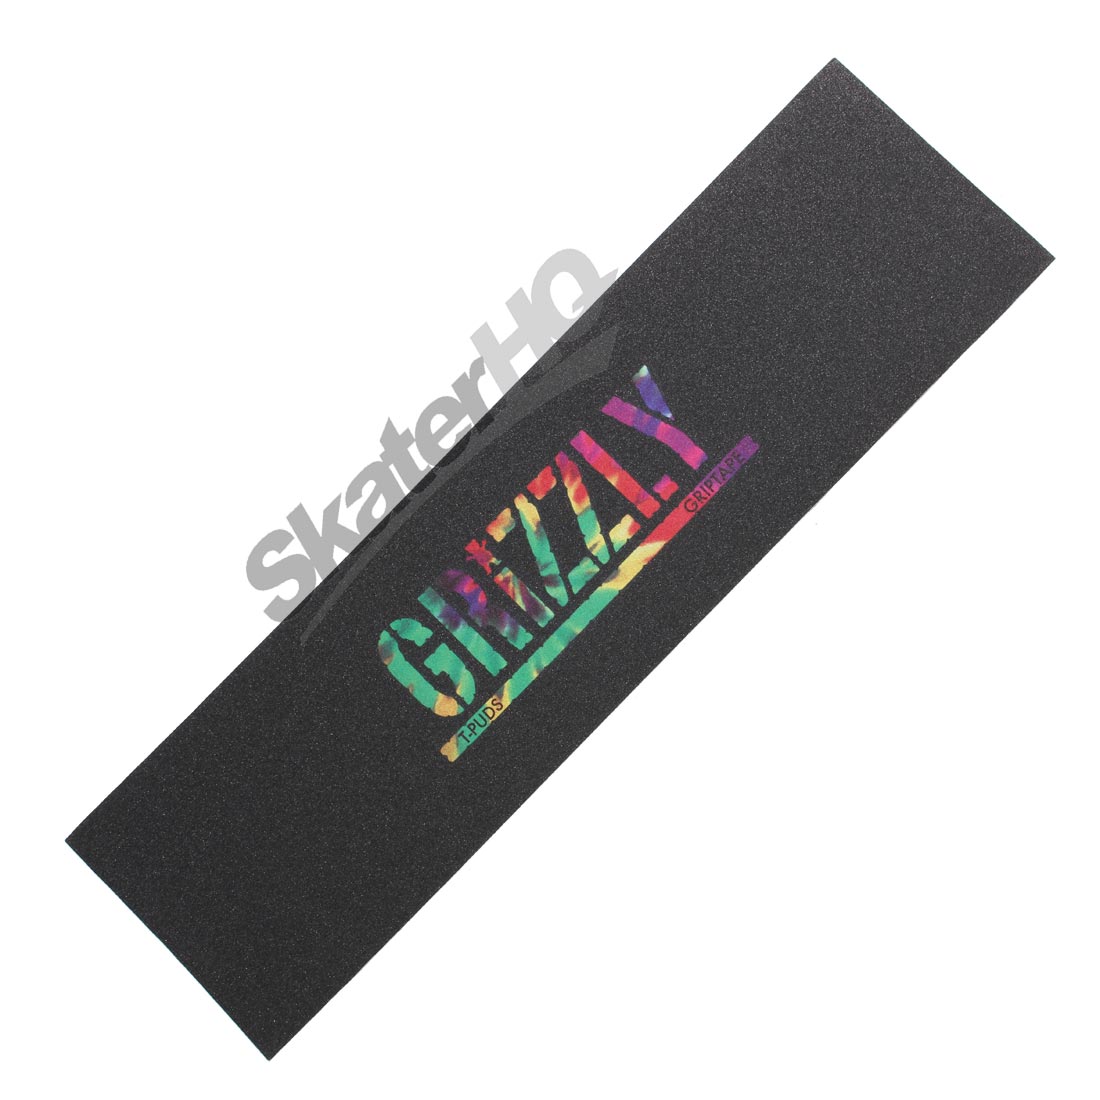 Grizzly Stamp Print T Puds Tie Dye Griptape